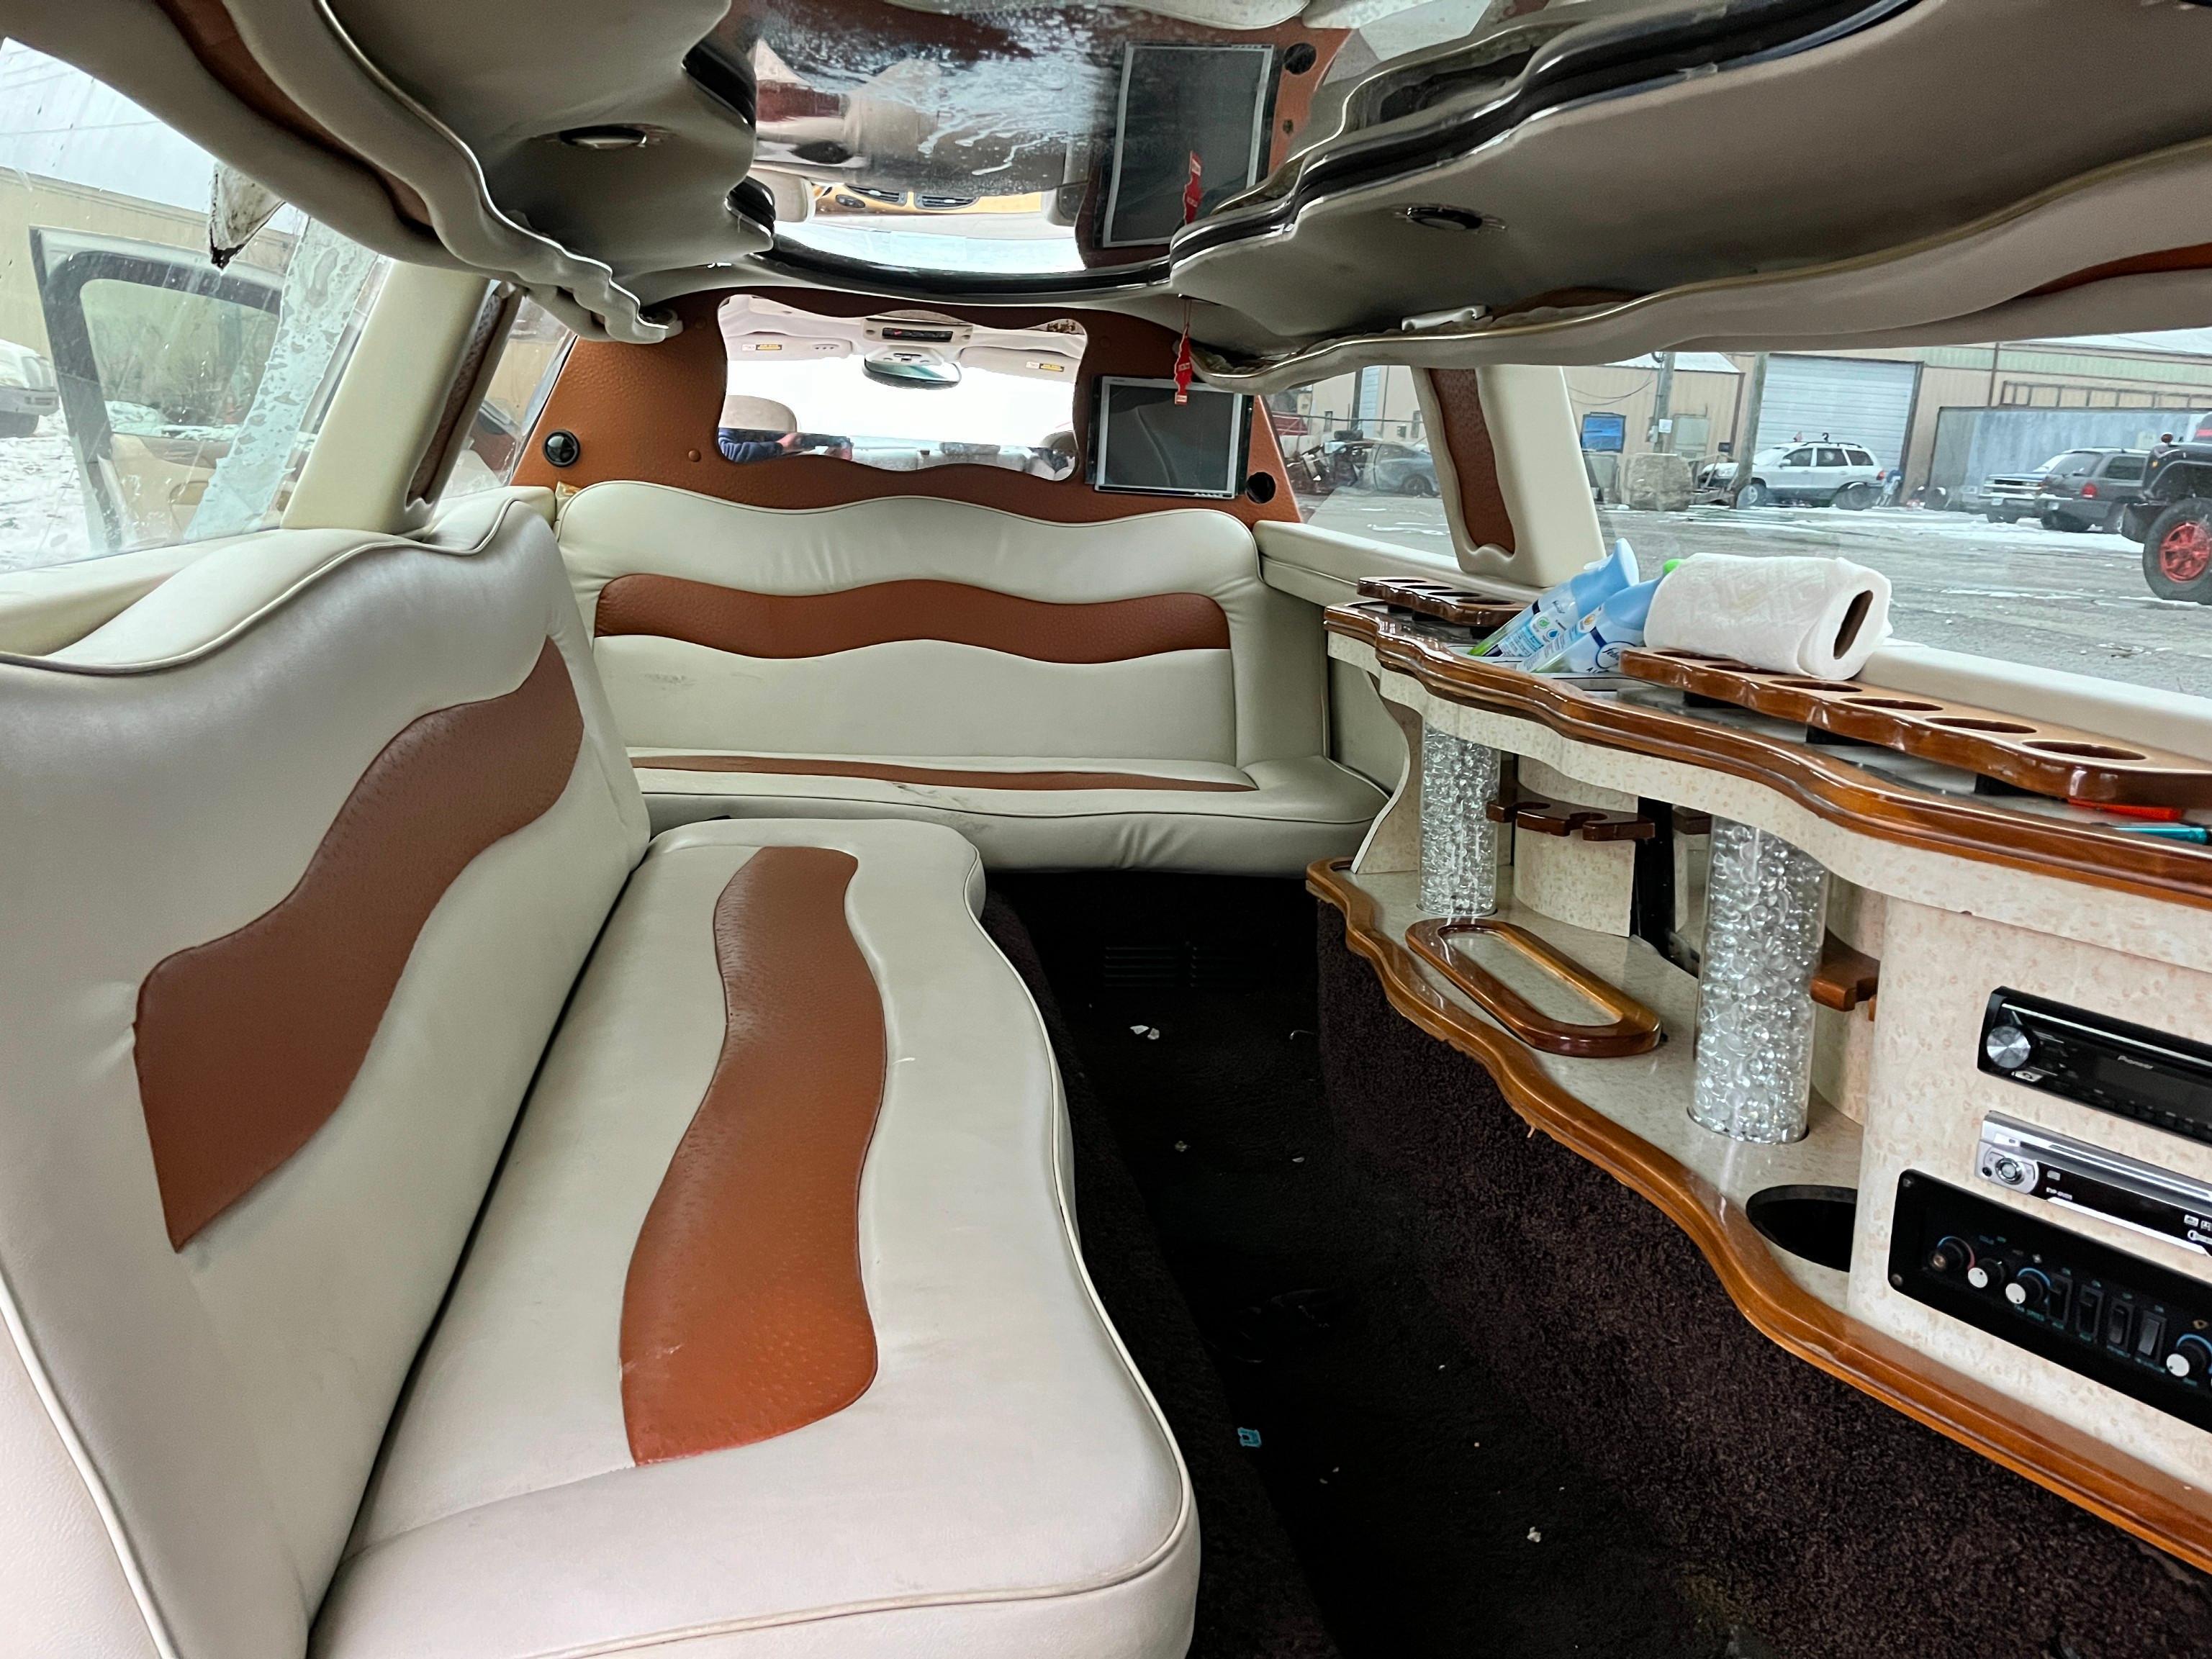 2001 JAGUAR S TYPE LIMOUSINE VN:SAJDA01PX1GL92067 powered by V8 gas engine, equipped with automatic